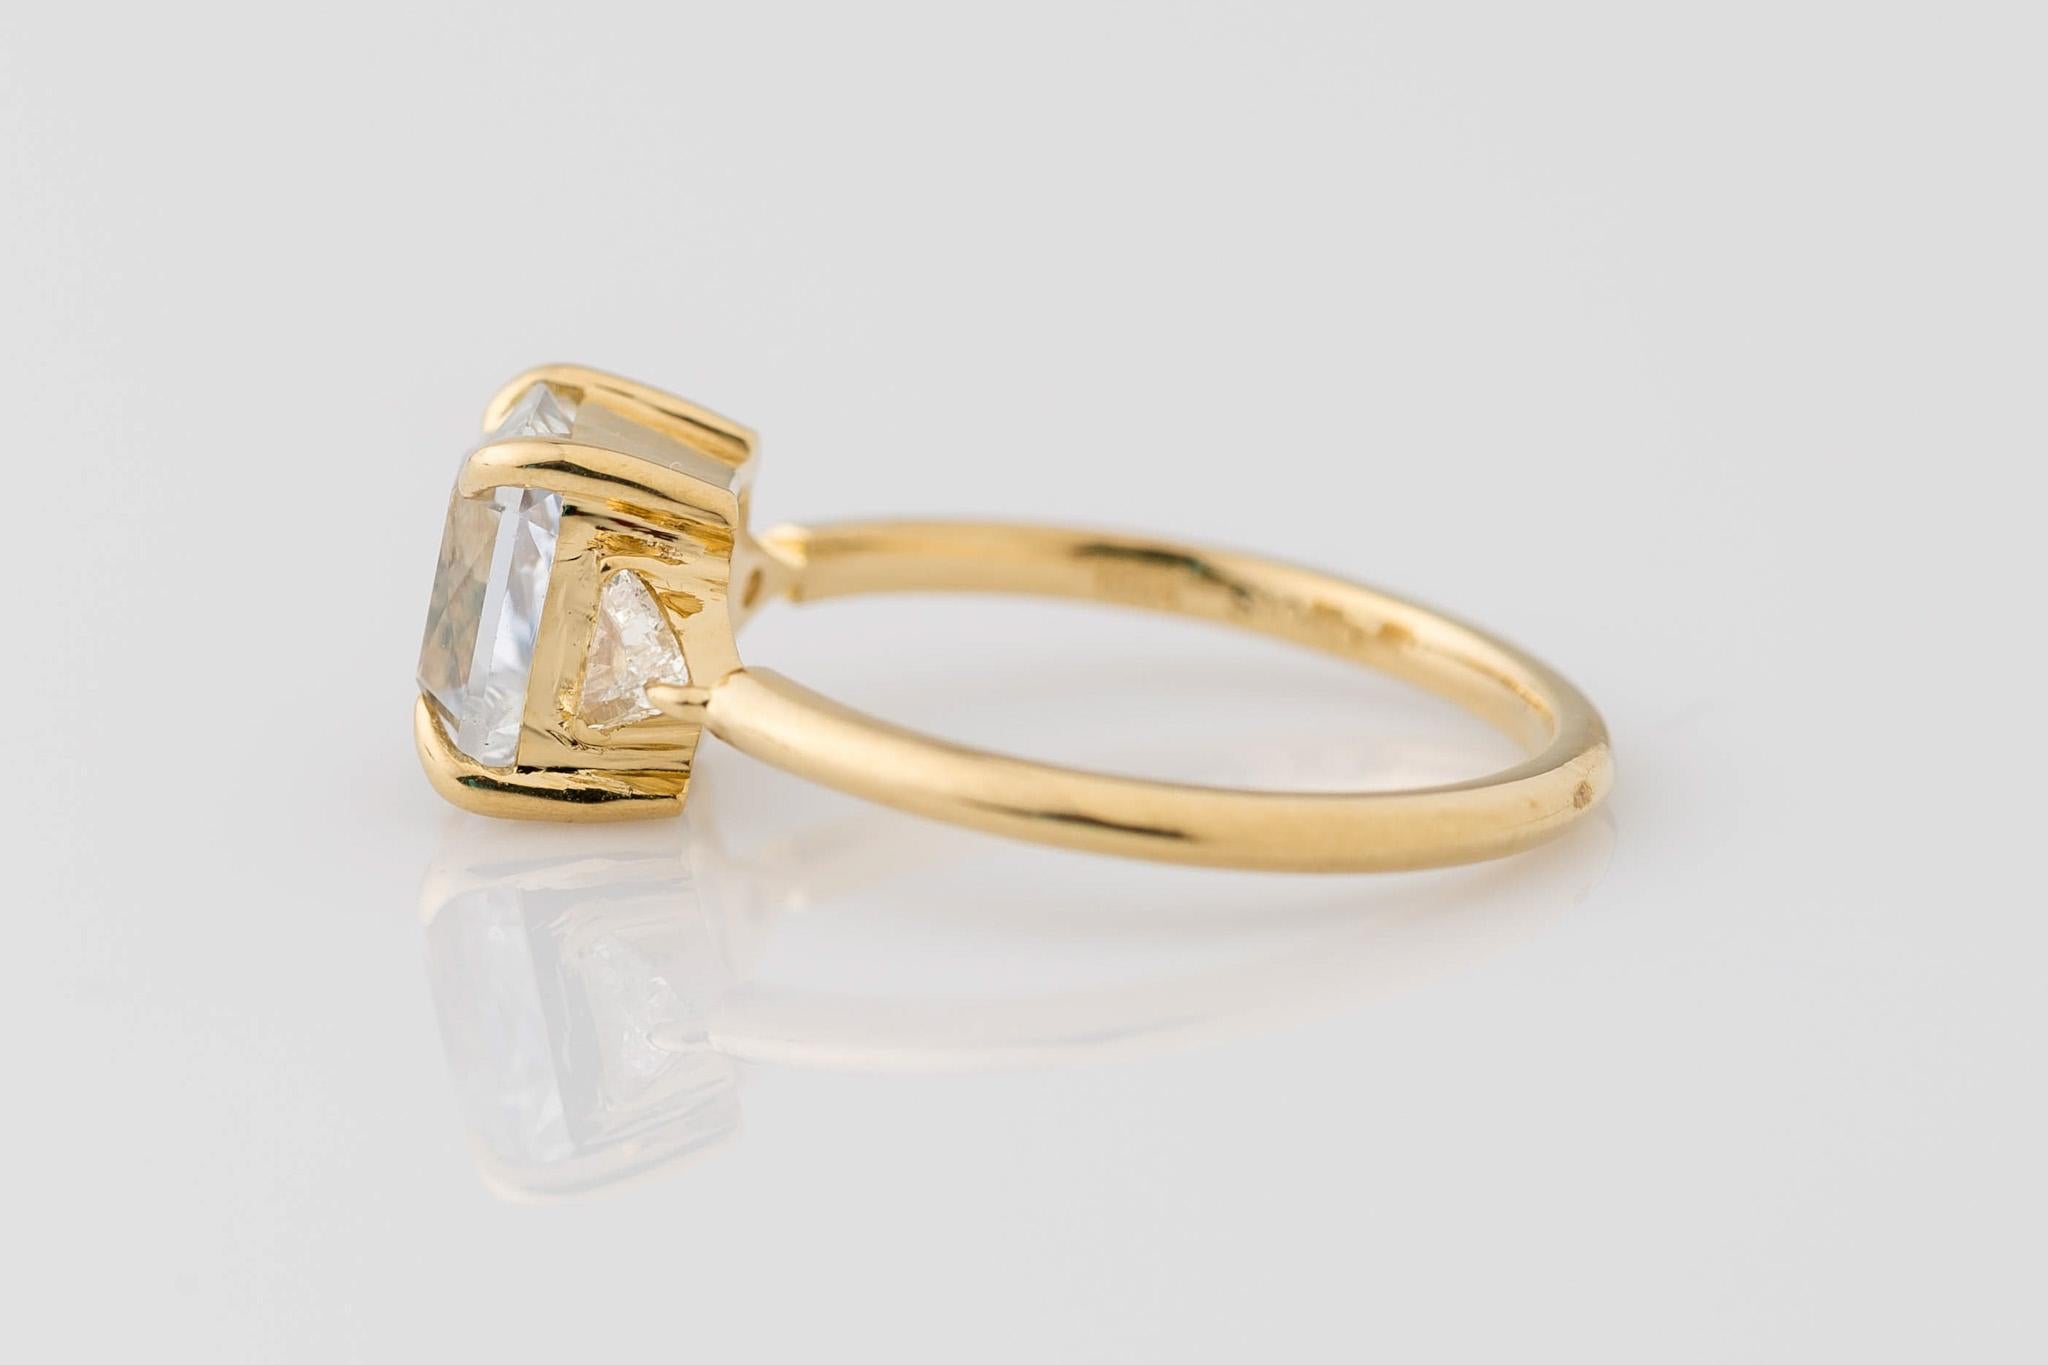 Celebrate your love with our exquisite 18K Yellow Gold GIA Certified Radiant Cut White Sapphire Engagement Ring, accentuated with Trillion Diamonds. The centerpiece boasts a GIA certified 2.22 carat white sapphire, measuring 7.25x6.35x5.16MM, in its